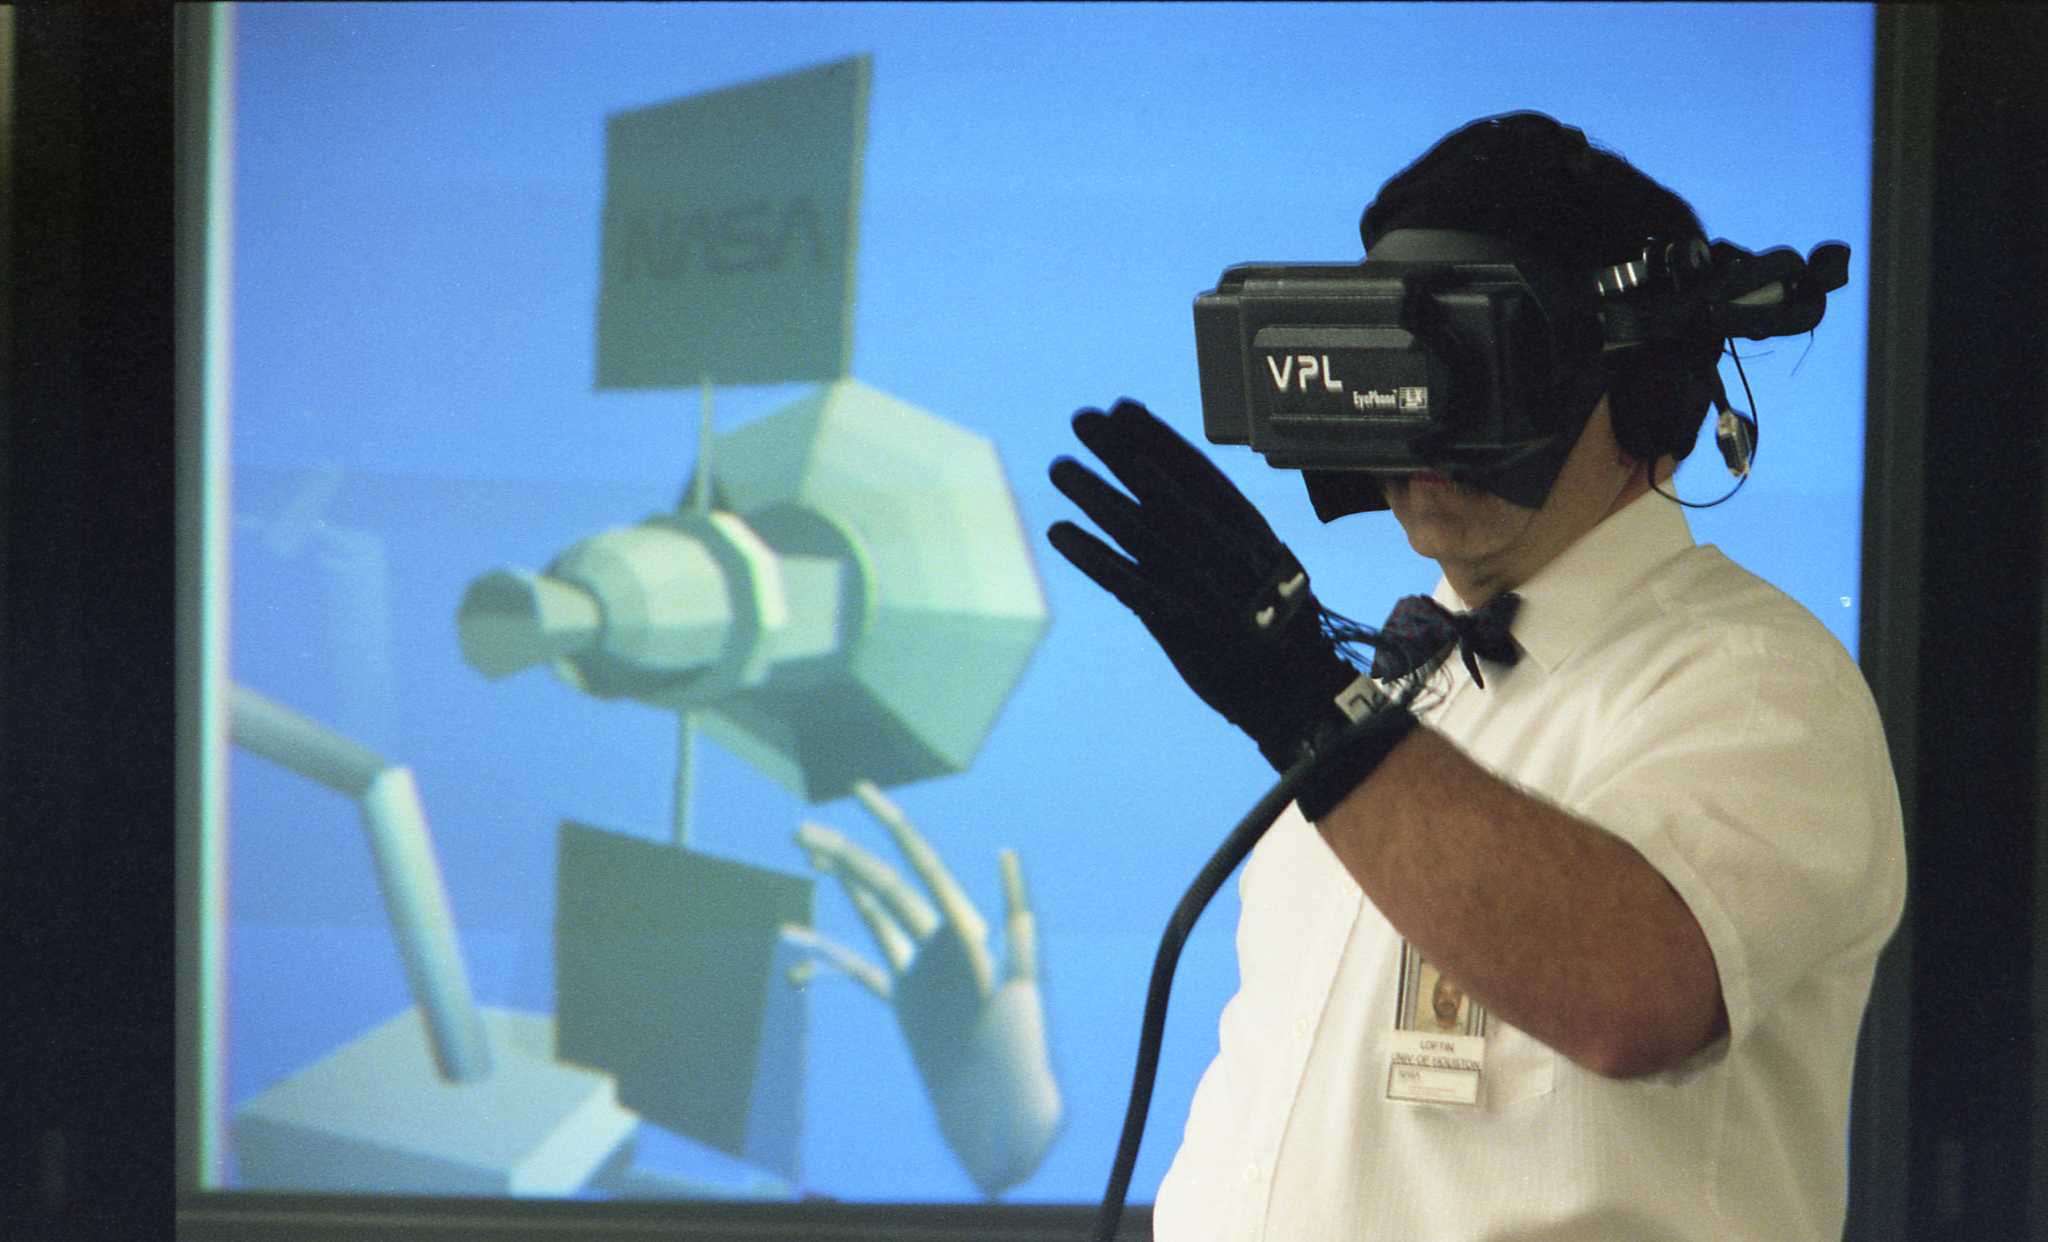 labyrint Swipe Alligevel From the archives: NASA explores virtual reality in 1992